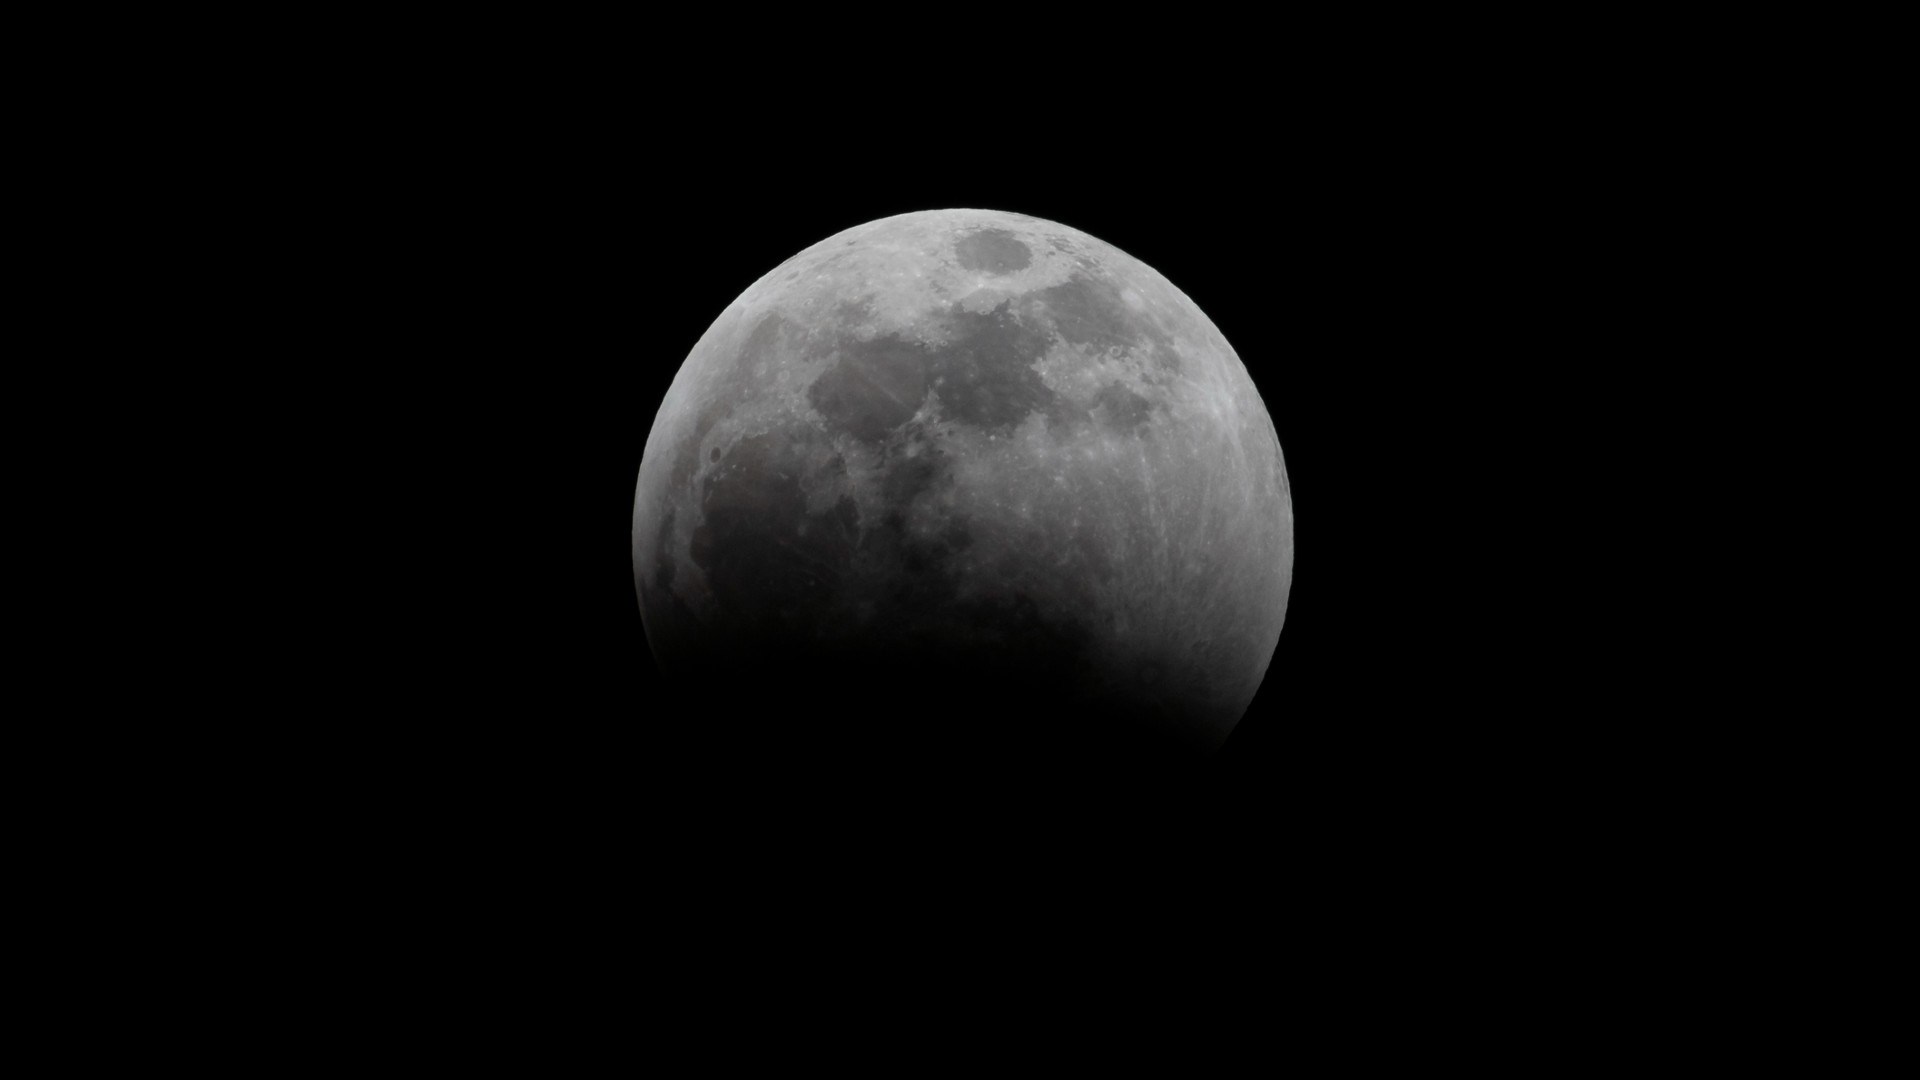 Don’t miss a partial lunar eclipse of October’s Full Hunter’s Moon this week Space